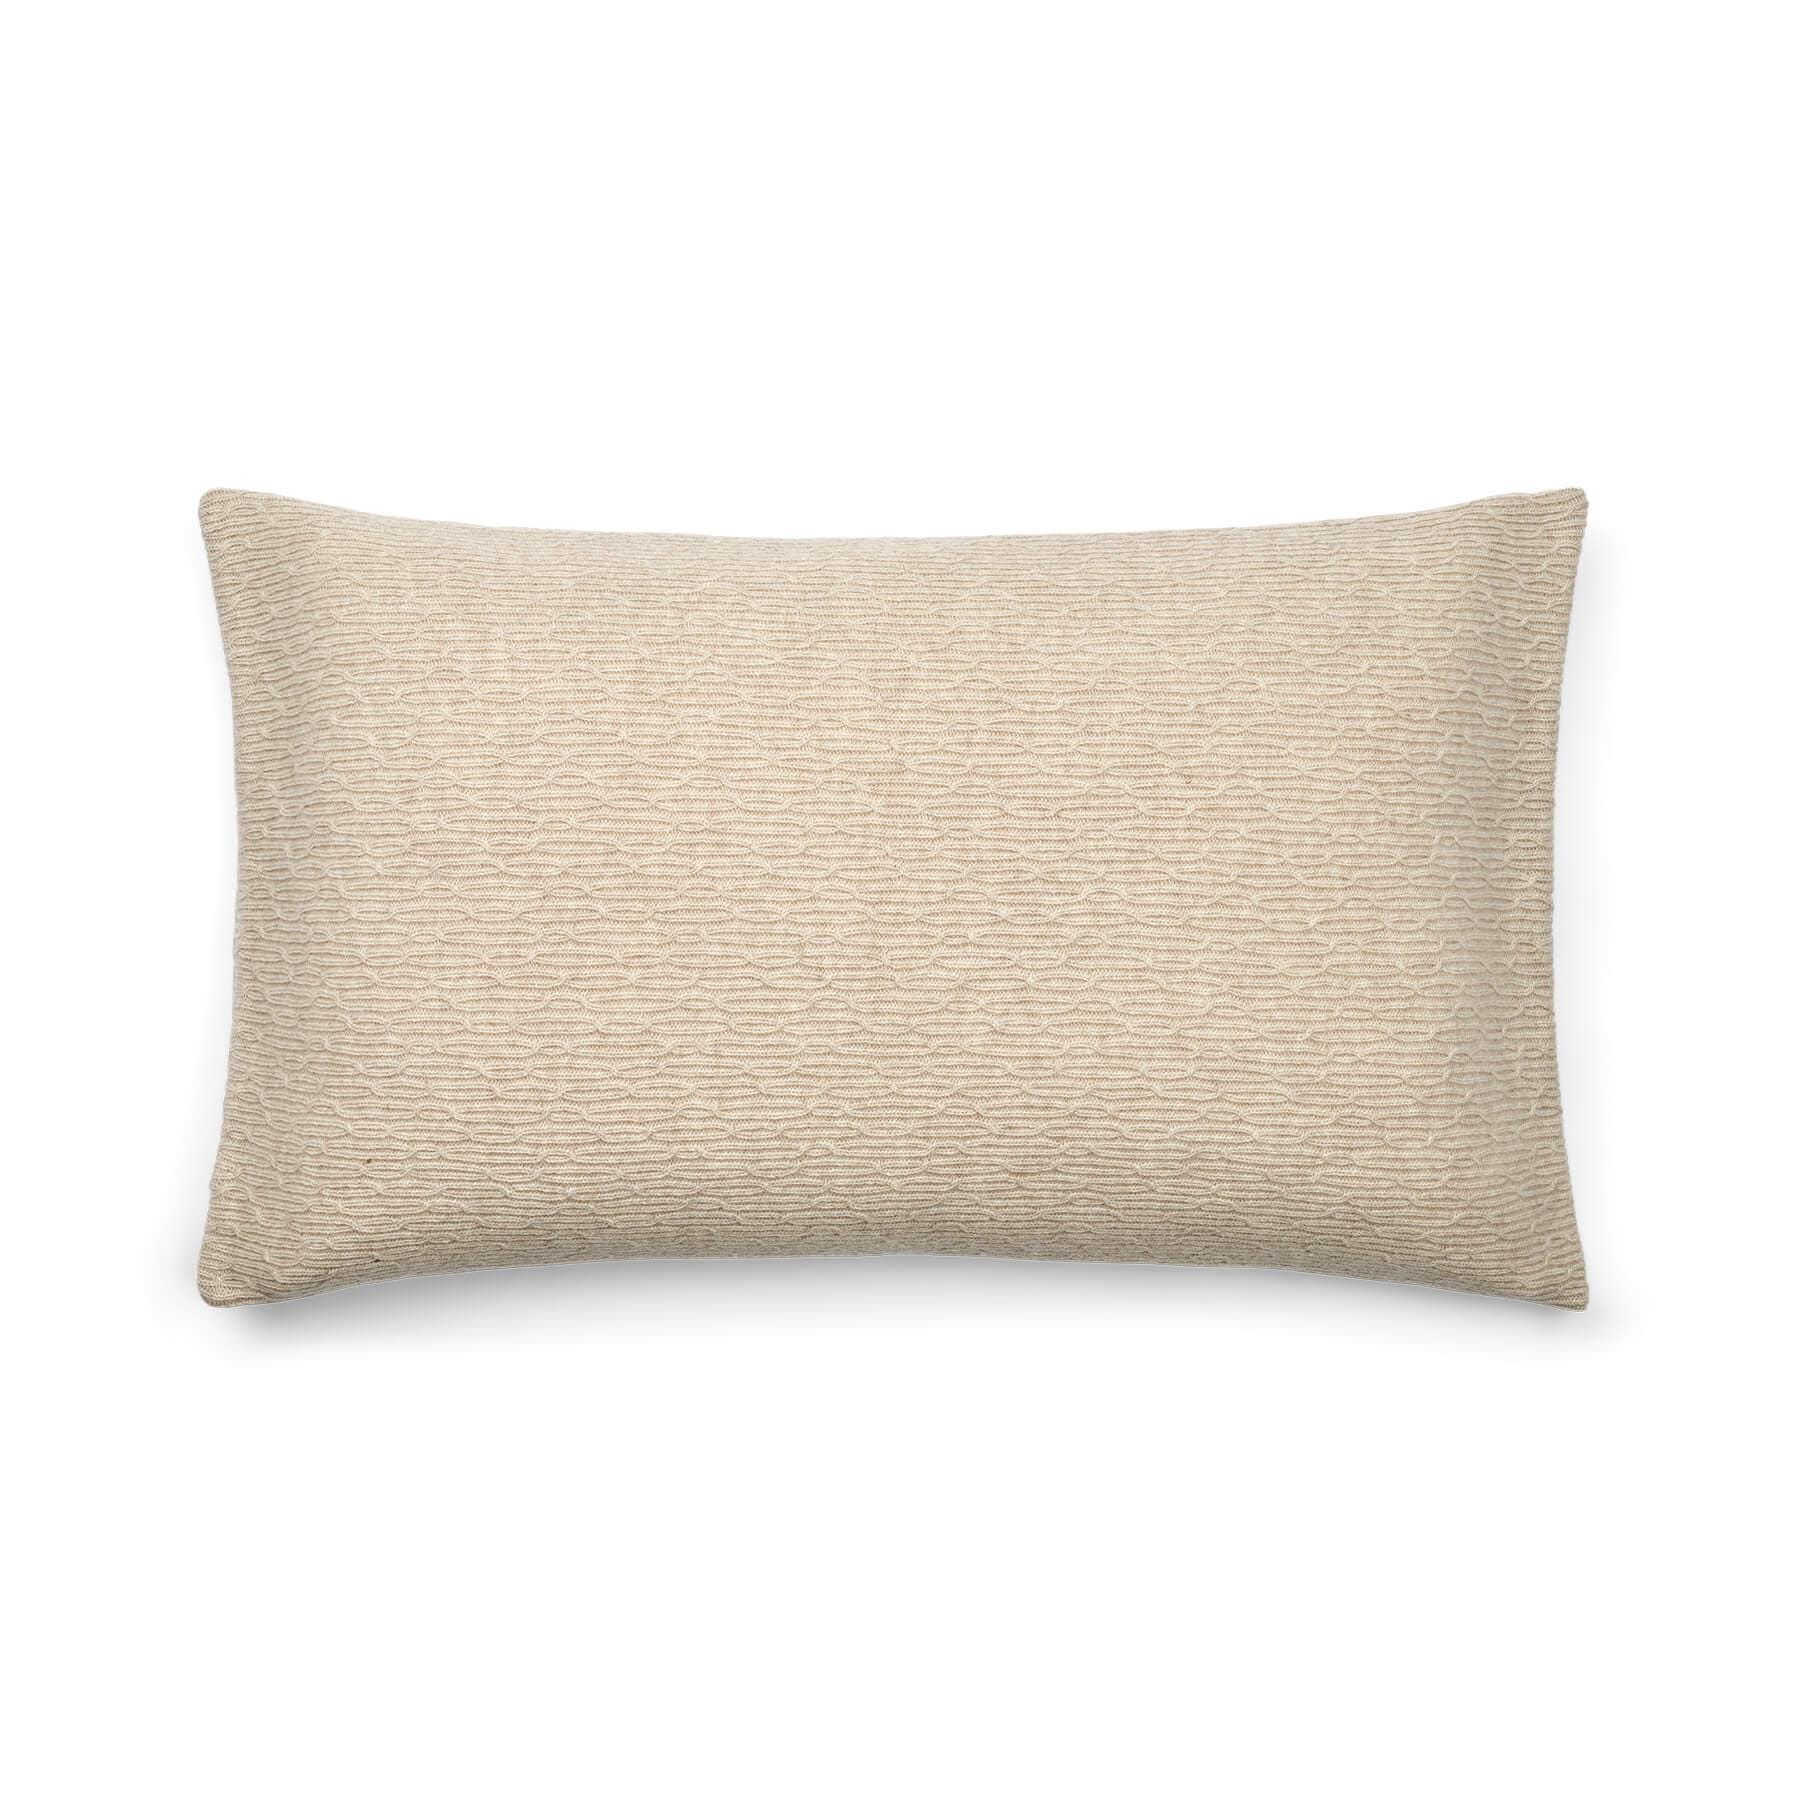 Bolia Plover Cushion 40 X 70cm Sand Lambswool Brown